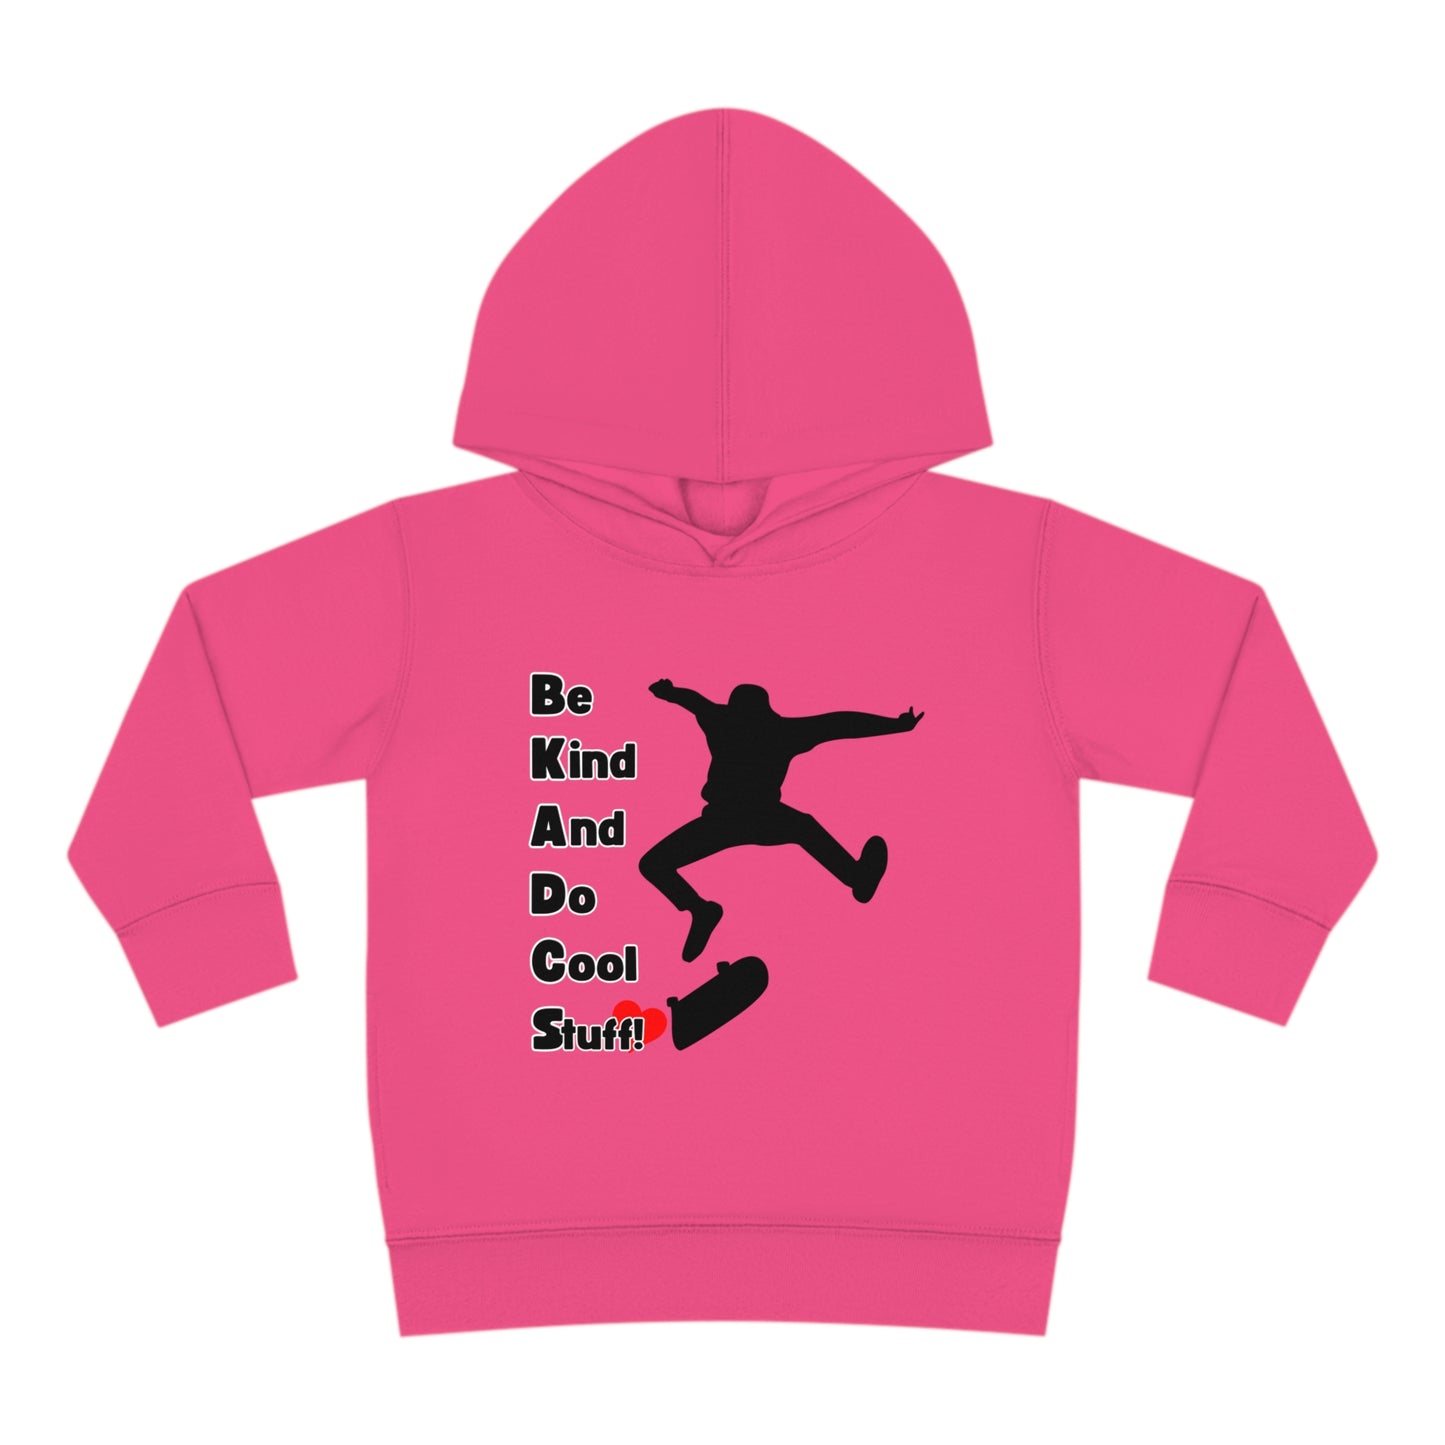 Be Kind And Do Cool Stuff! Skater Toddler Pullover Fleece Hoodie